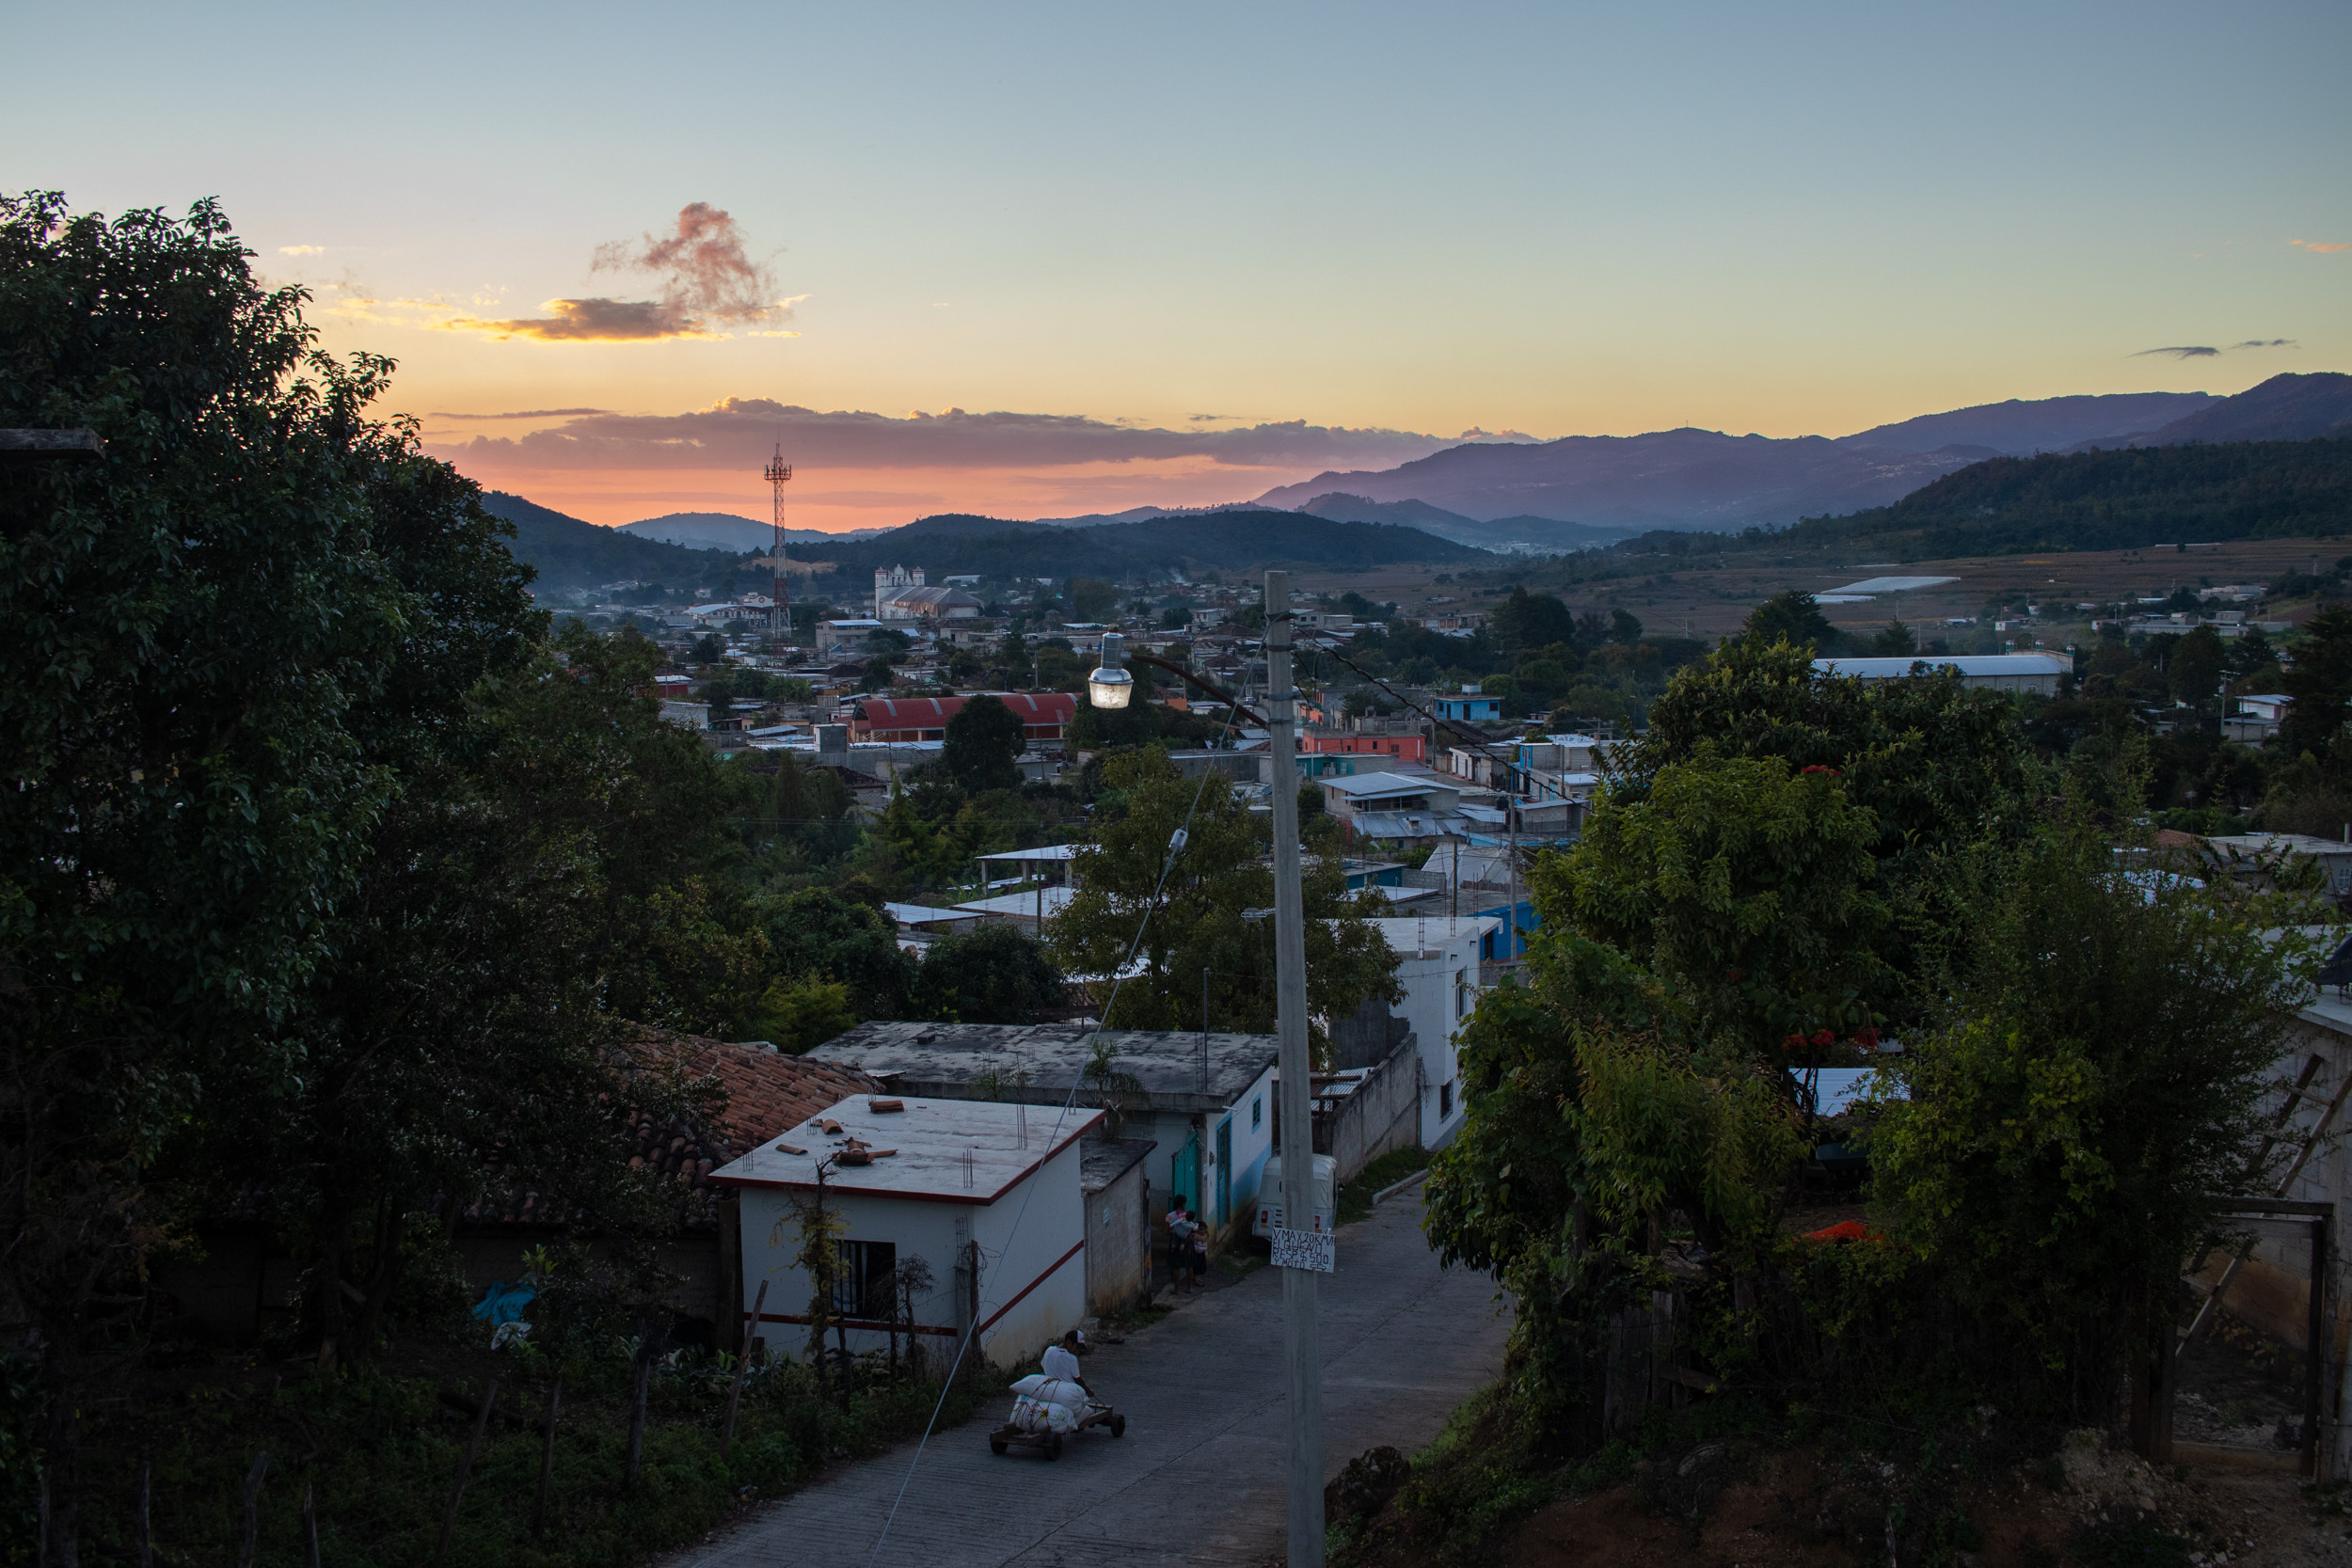 A city in Guatemala at dusk